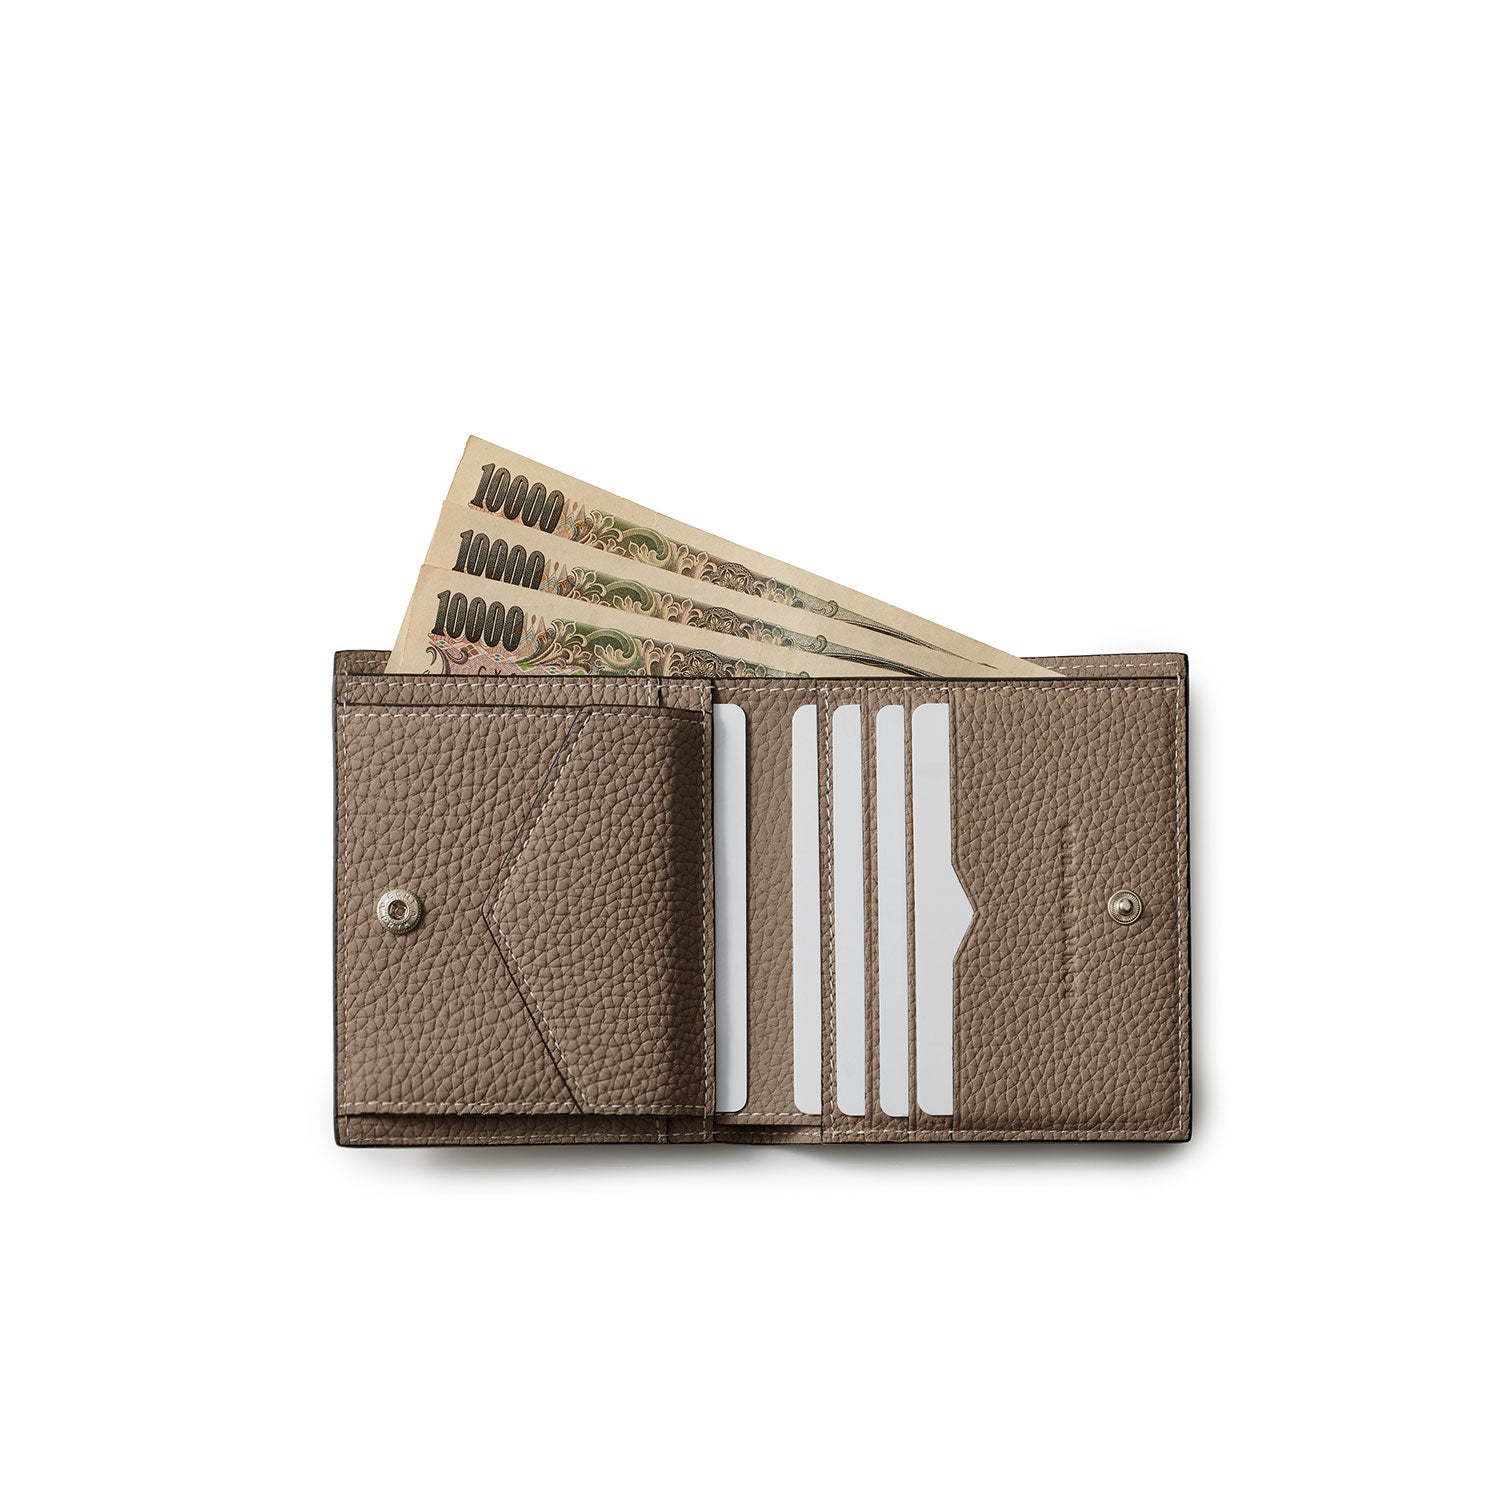 All-shrunk leather bifold wallet